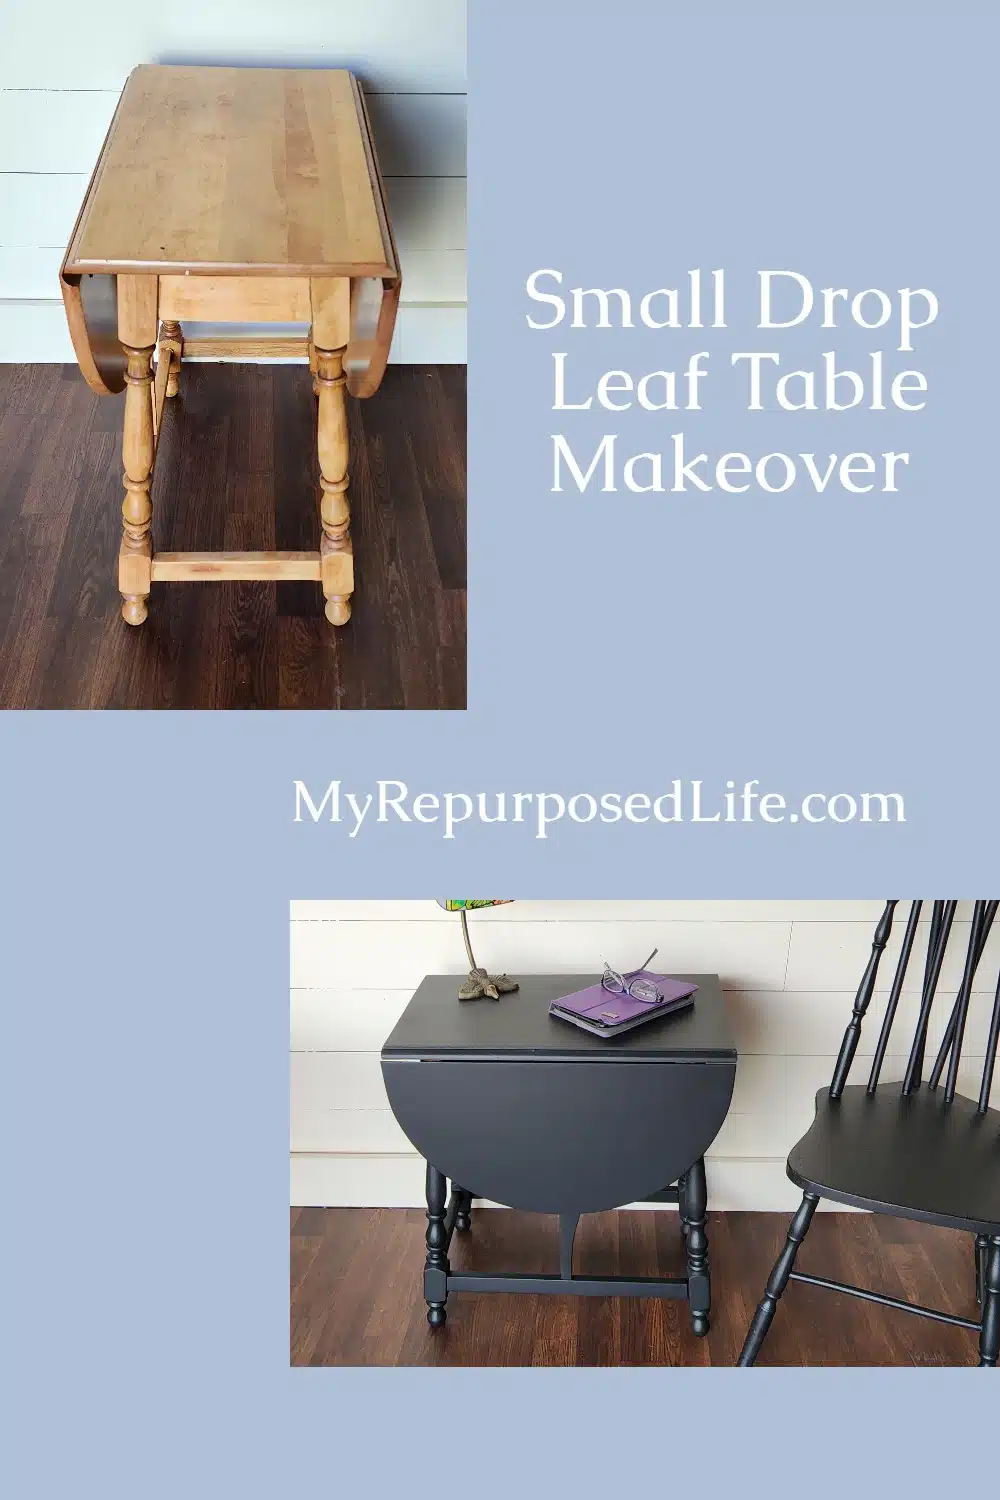 A free small drop leaf table gets a new, updated look using milk paint and a paint sprayer. Bonus: tips for prepping furniture, and four other projects because it's furniture fixer upper day. via @repurposedlife